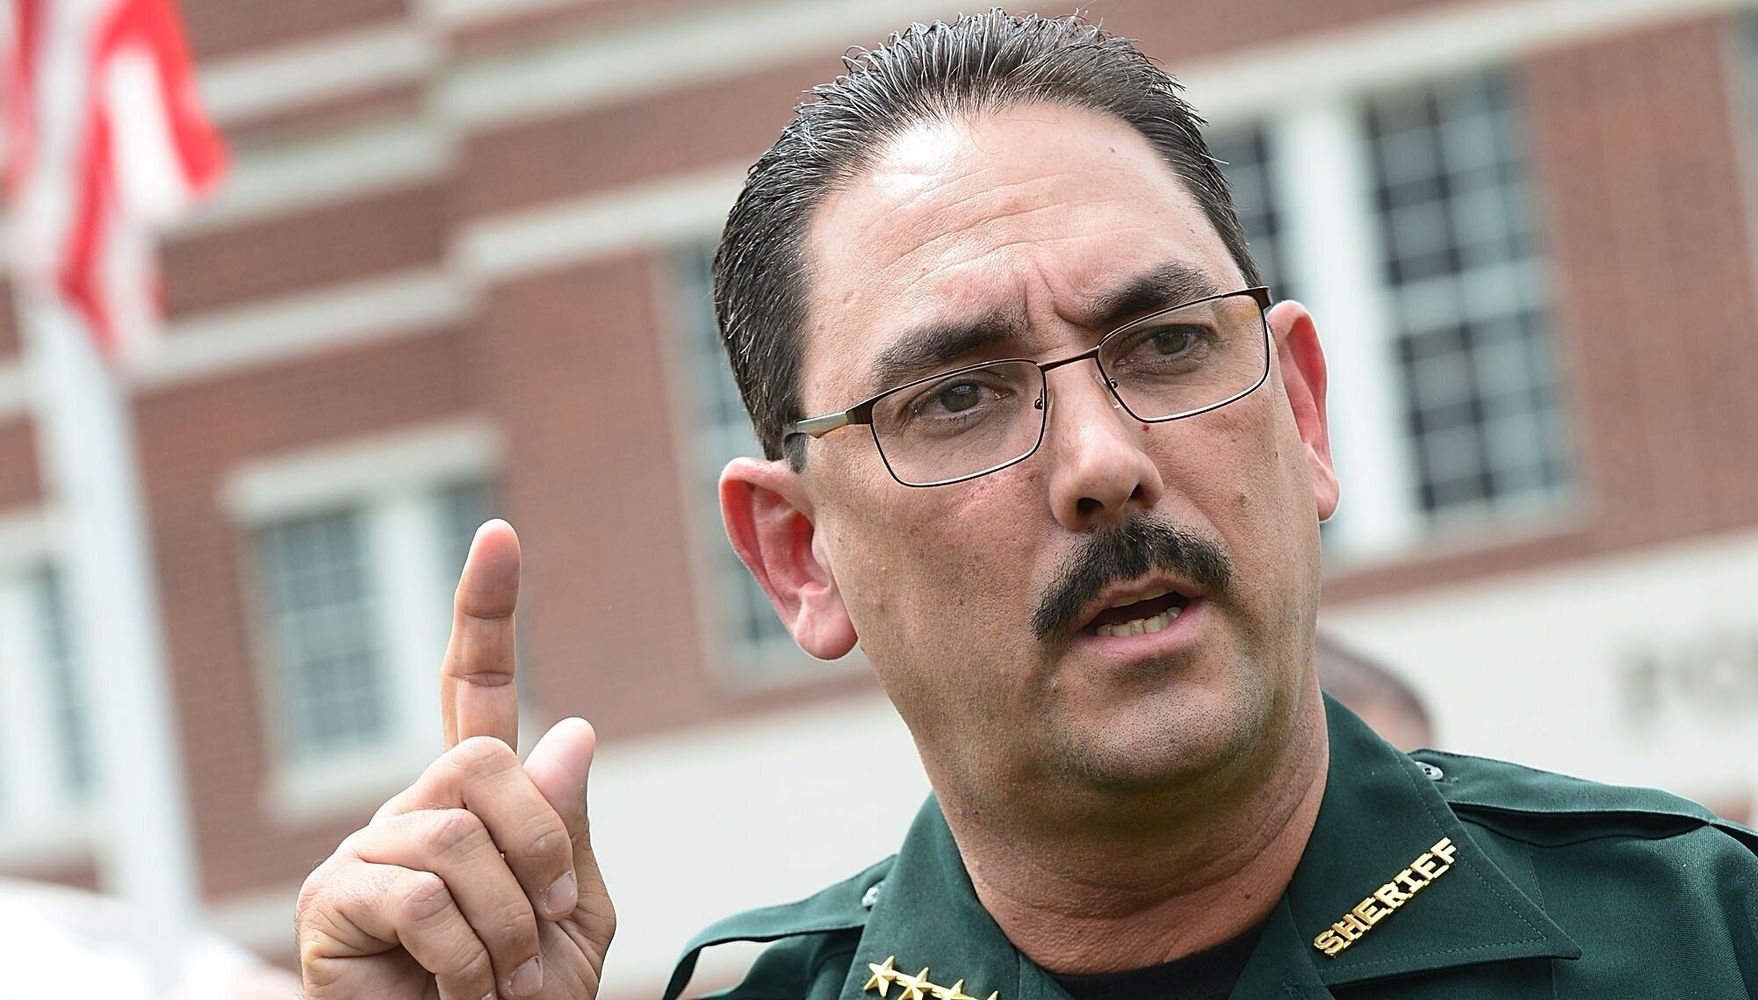 Florida Sheriff In COVID-19 Hot Spot Decrees No Face Masks For Deputies